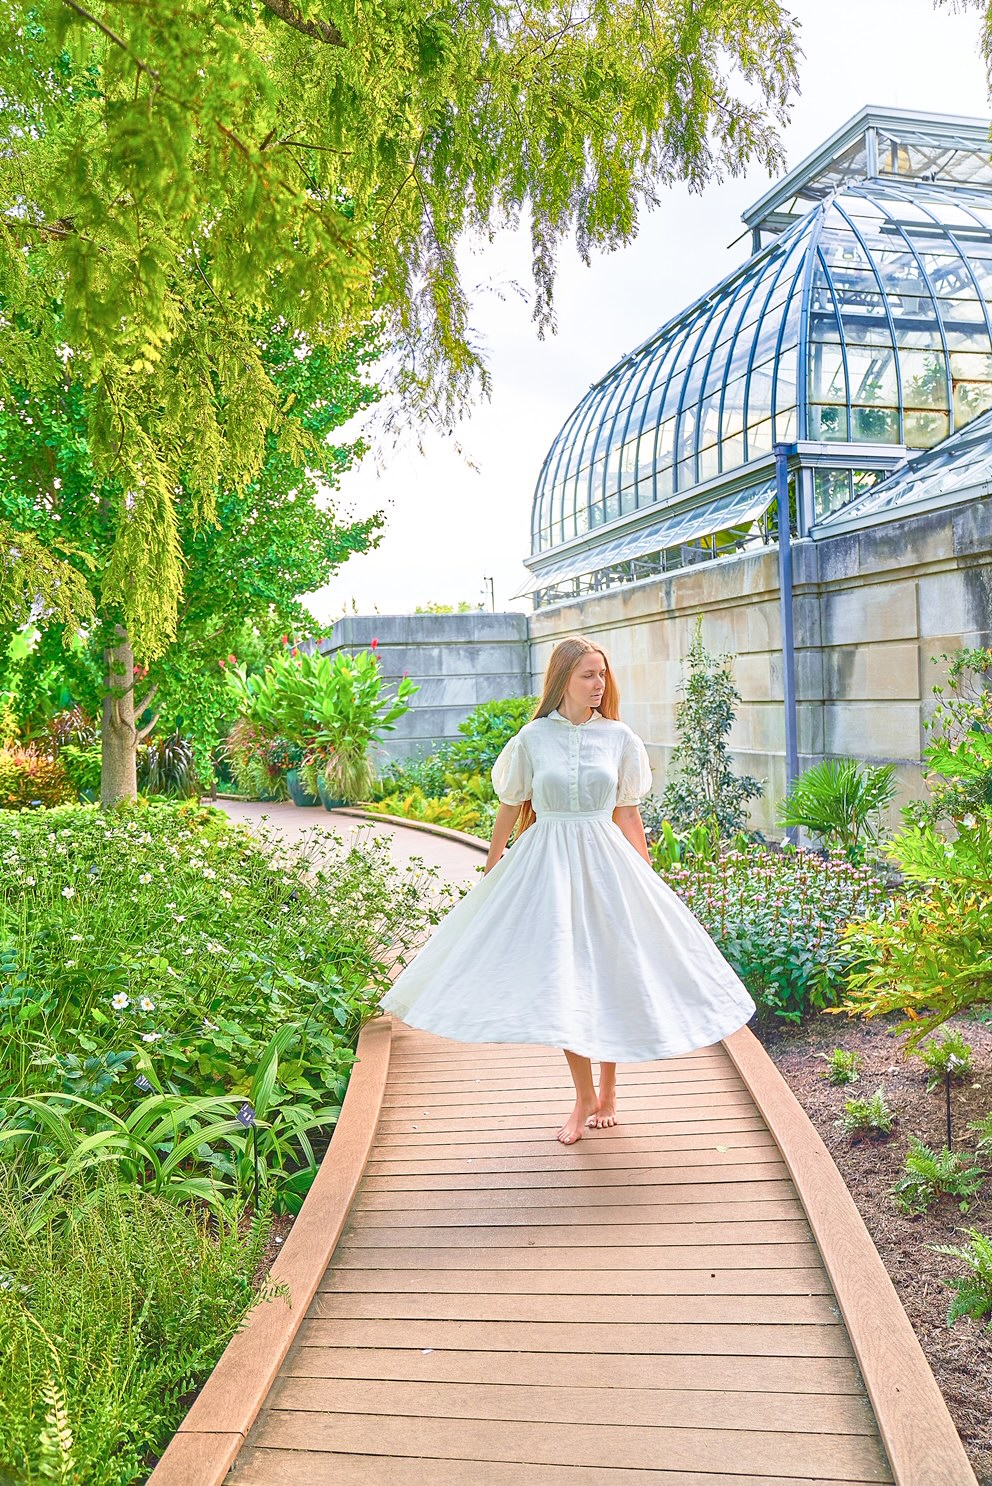 A woman in a white dress standing on a wooden walkway. She is surrounded by different plants and trees. You can see a conservatory building in the background. 